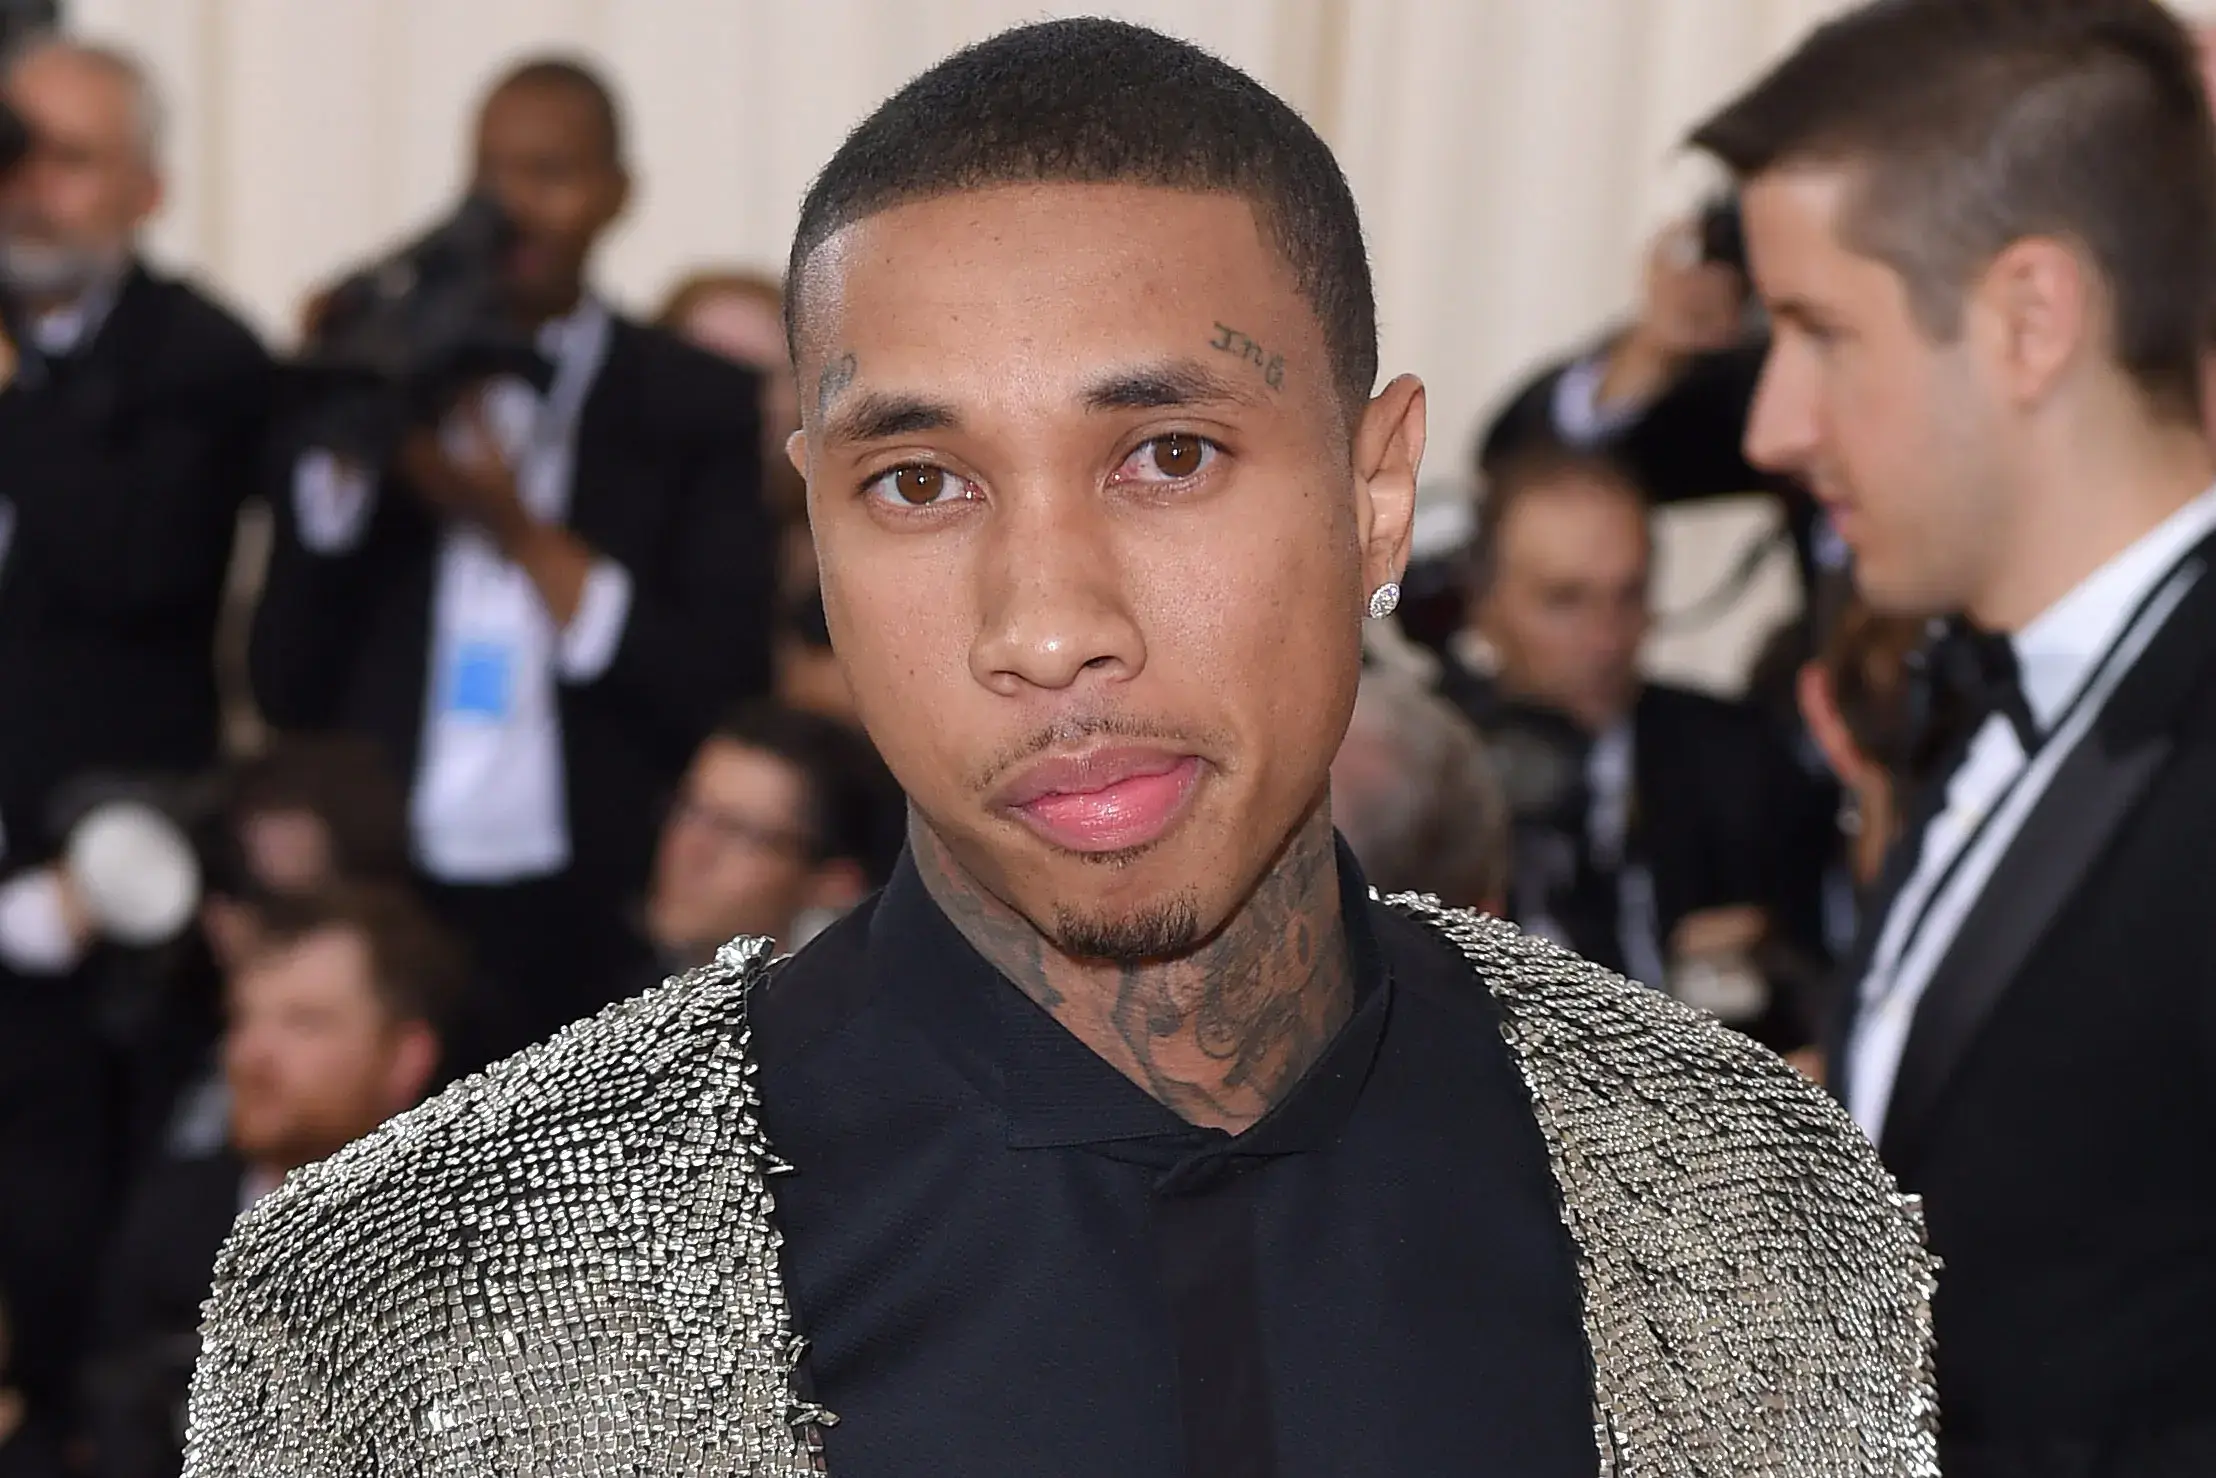 Tyga - Male Celebs Who Are Trolled Online For Having OnlyFans Account